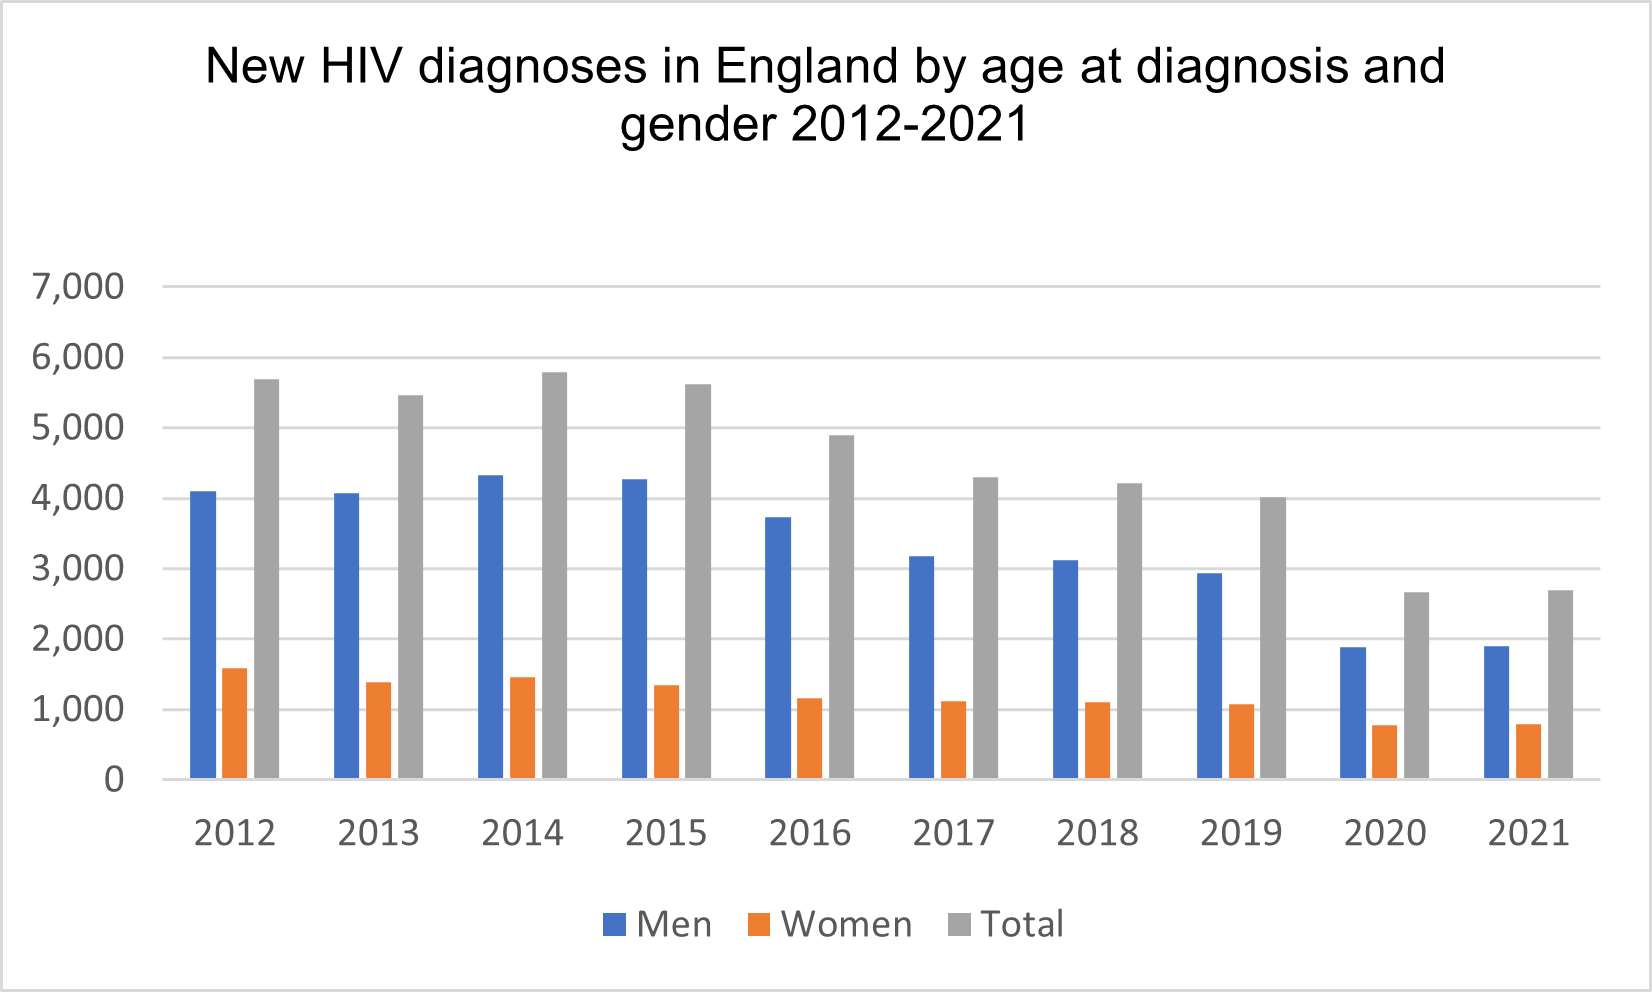 Between 2012 and 2021, the total number of new HIV diagnoses in England decreased from approximately 5,700 to approximately 2,700. For men, between 2012 and 2021, the total number of new HIV diagnoses decreased from approximately 4,000 to approximately 1,900. For women, between 2012 and 2021, the total number of new HIV diagnoses decreased from approximately 1,800 to approximately 800. 